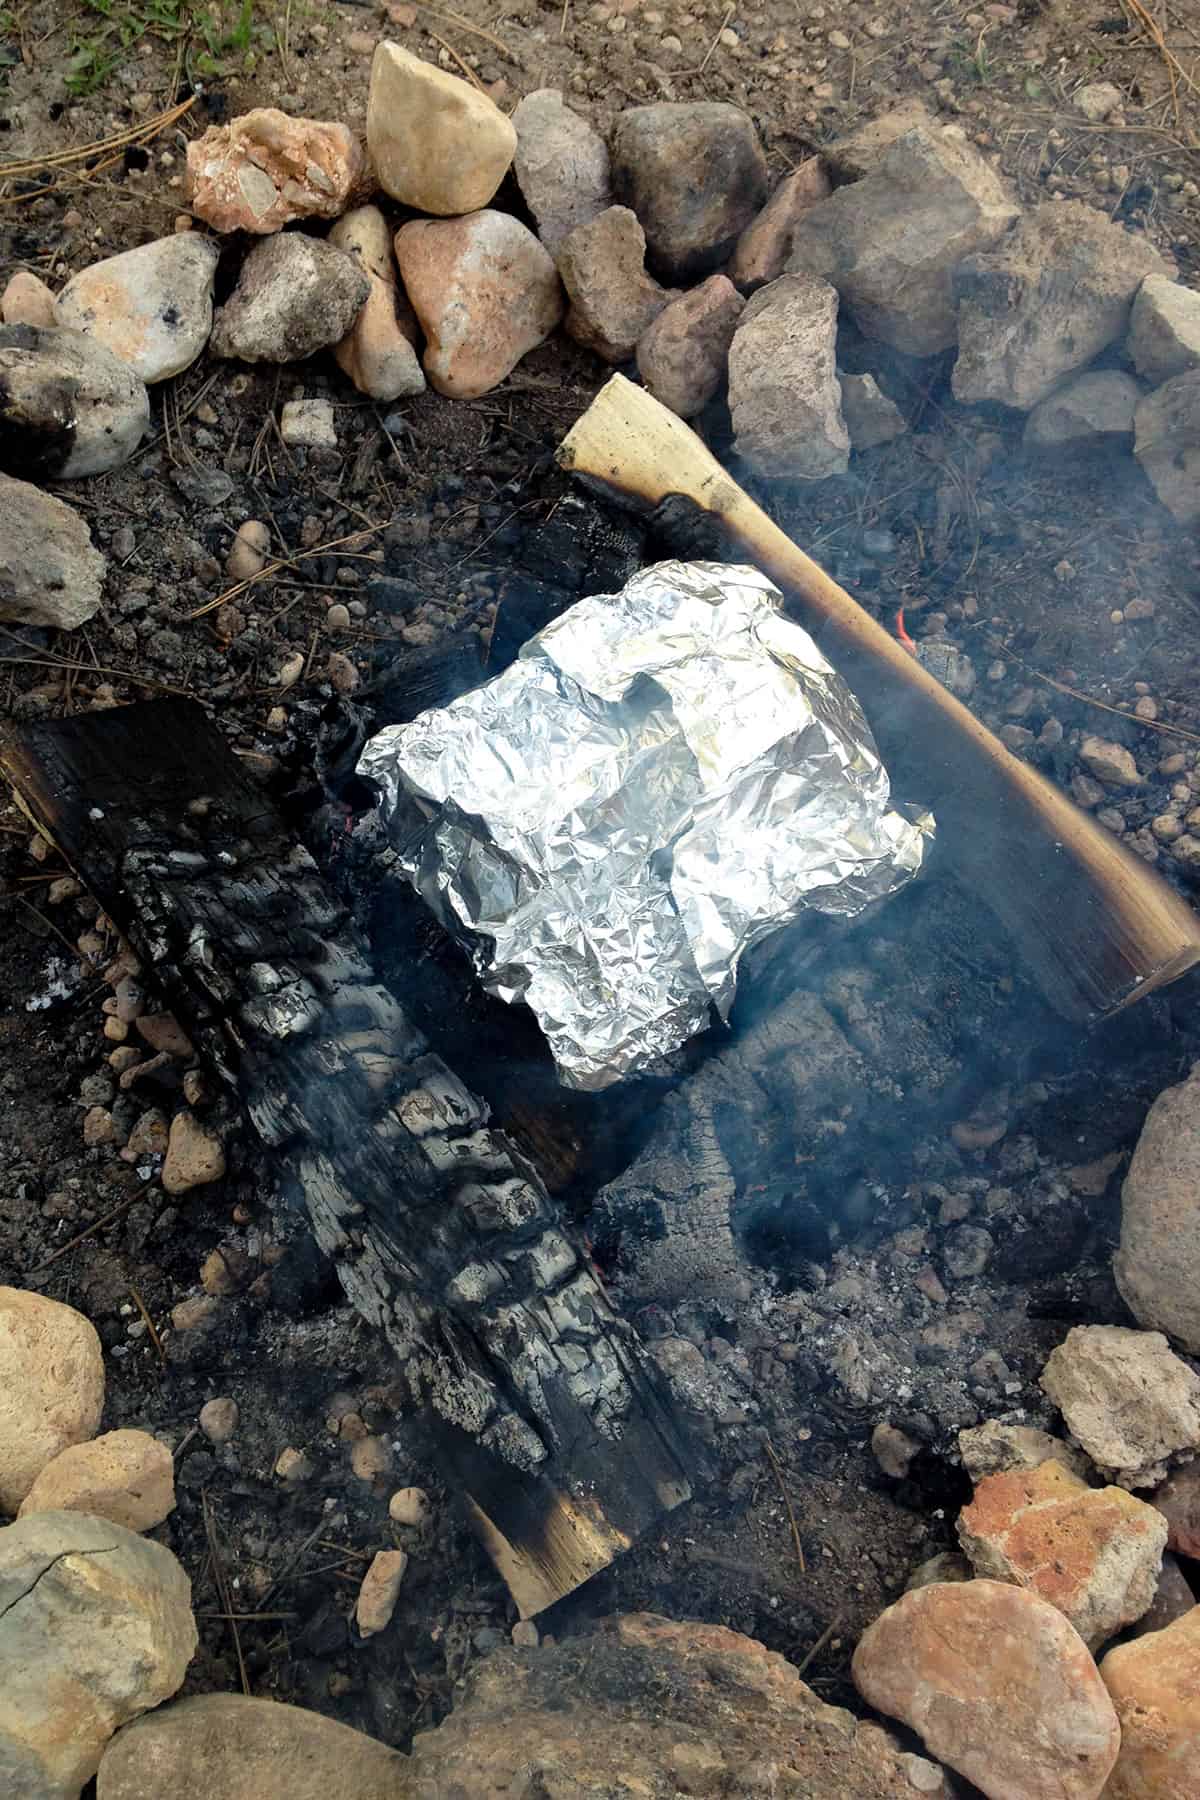 hobo stew cooking on hot coals that have ashed over.